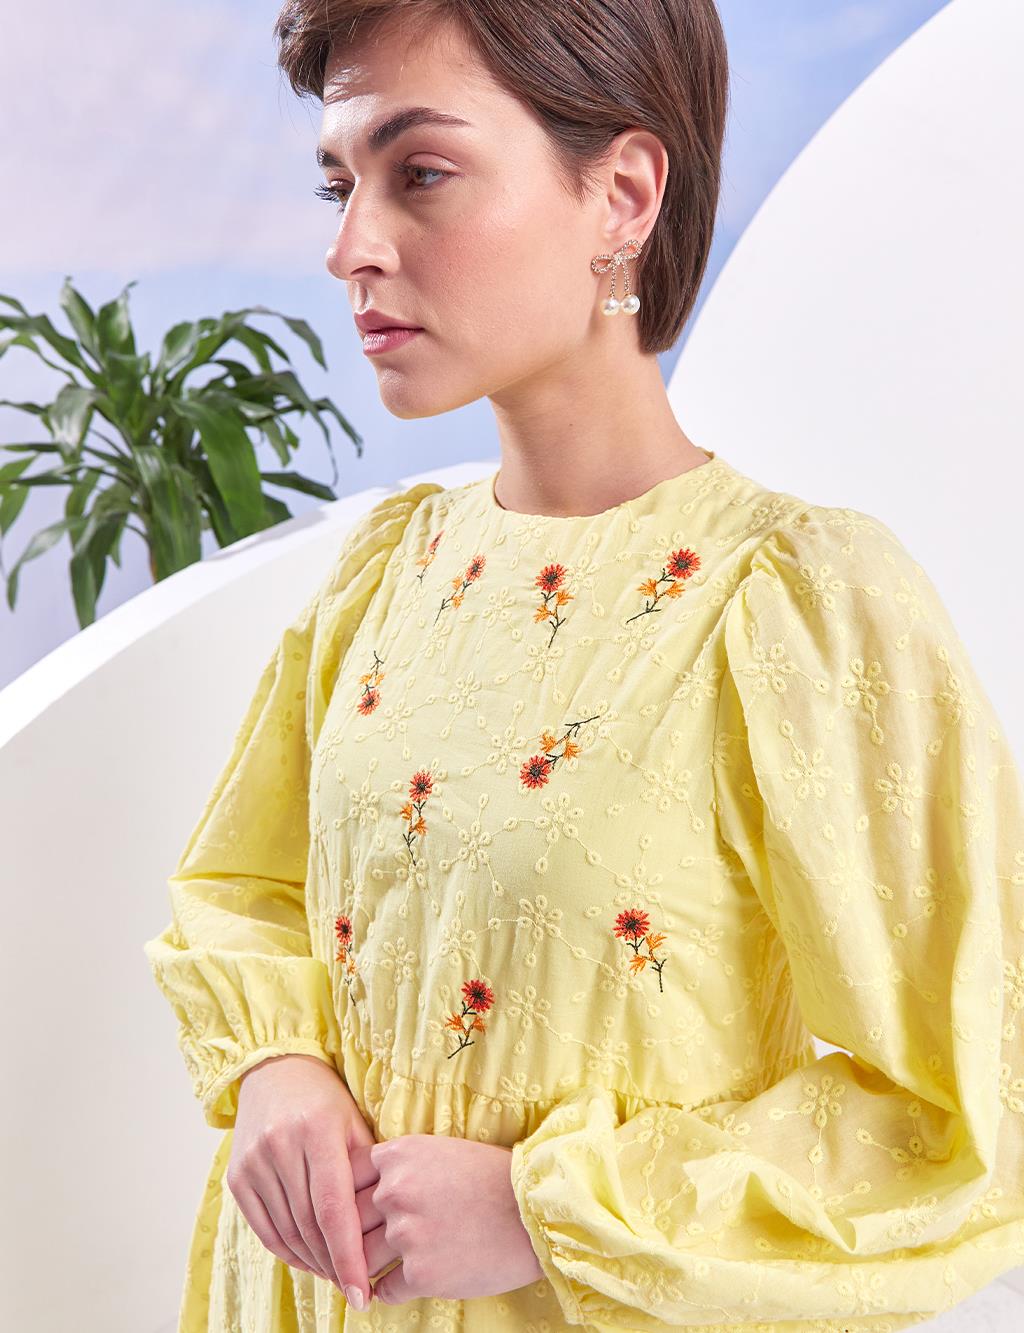 KYR Floral Embroidery Dress Yellow